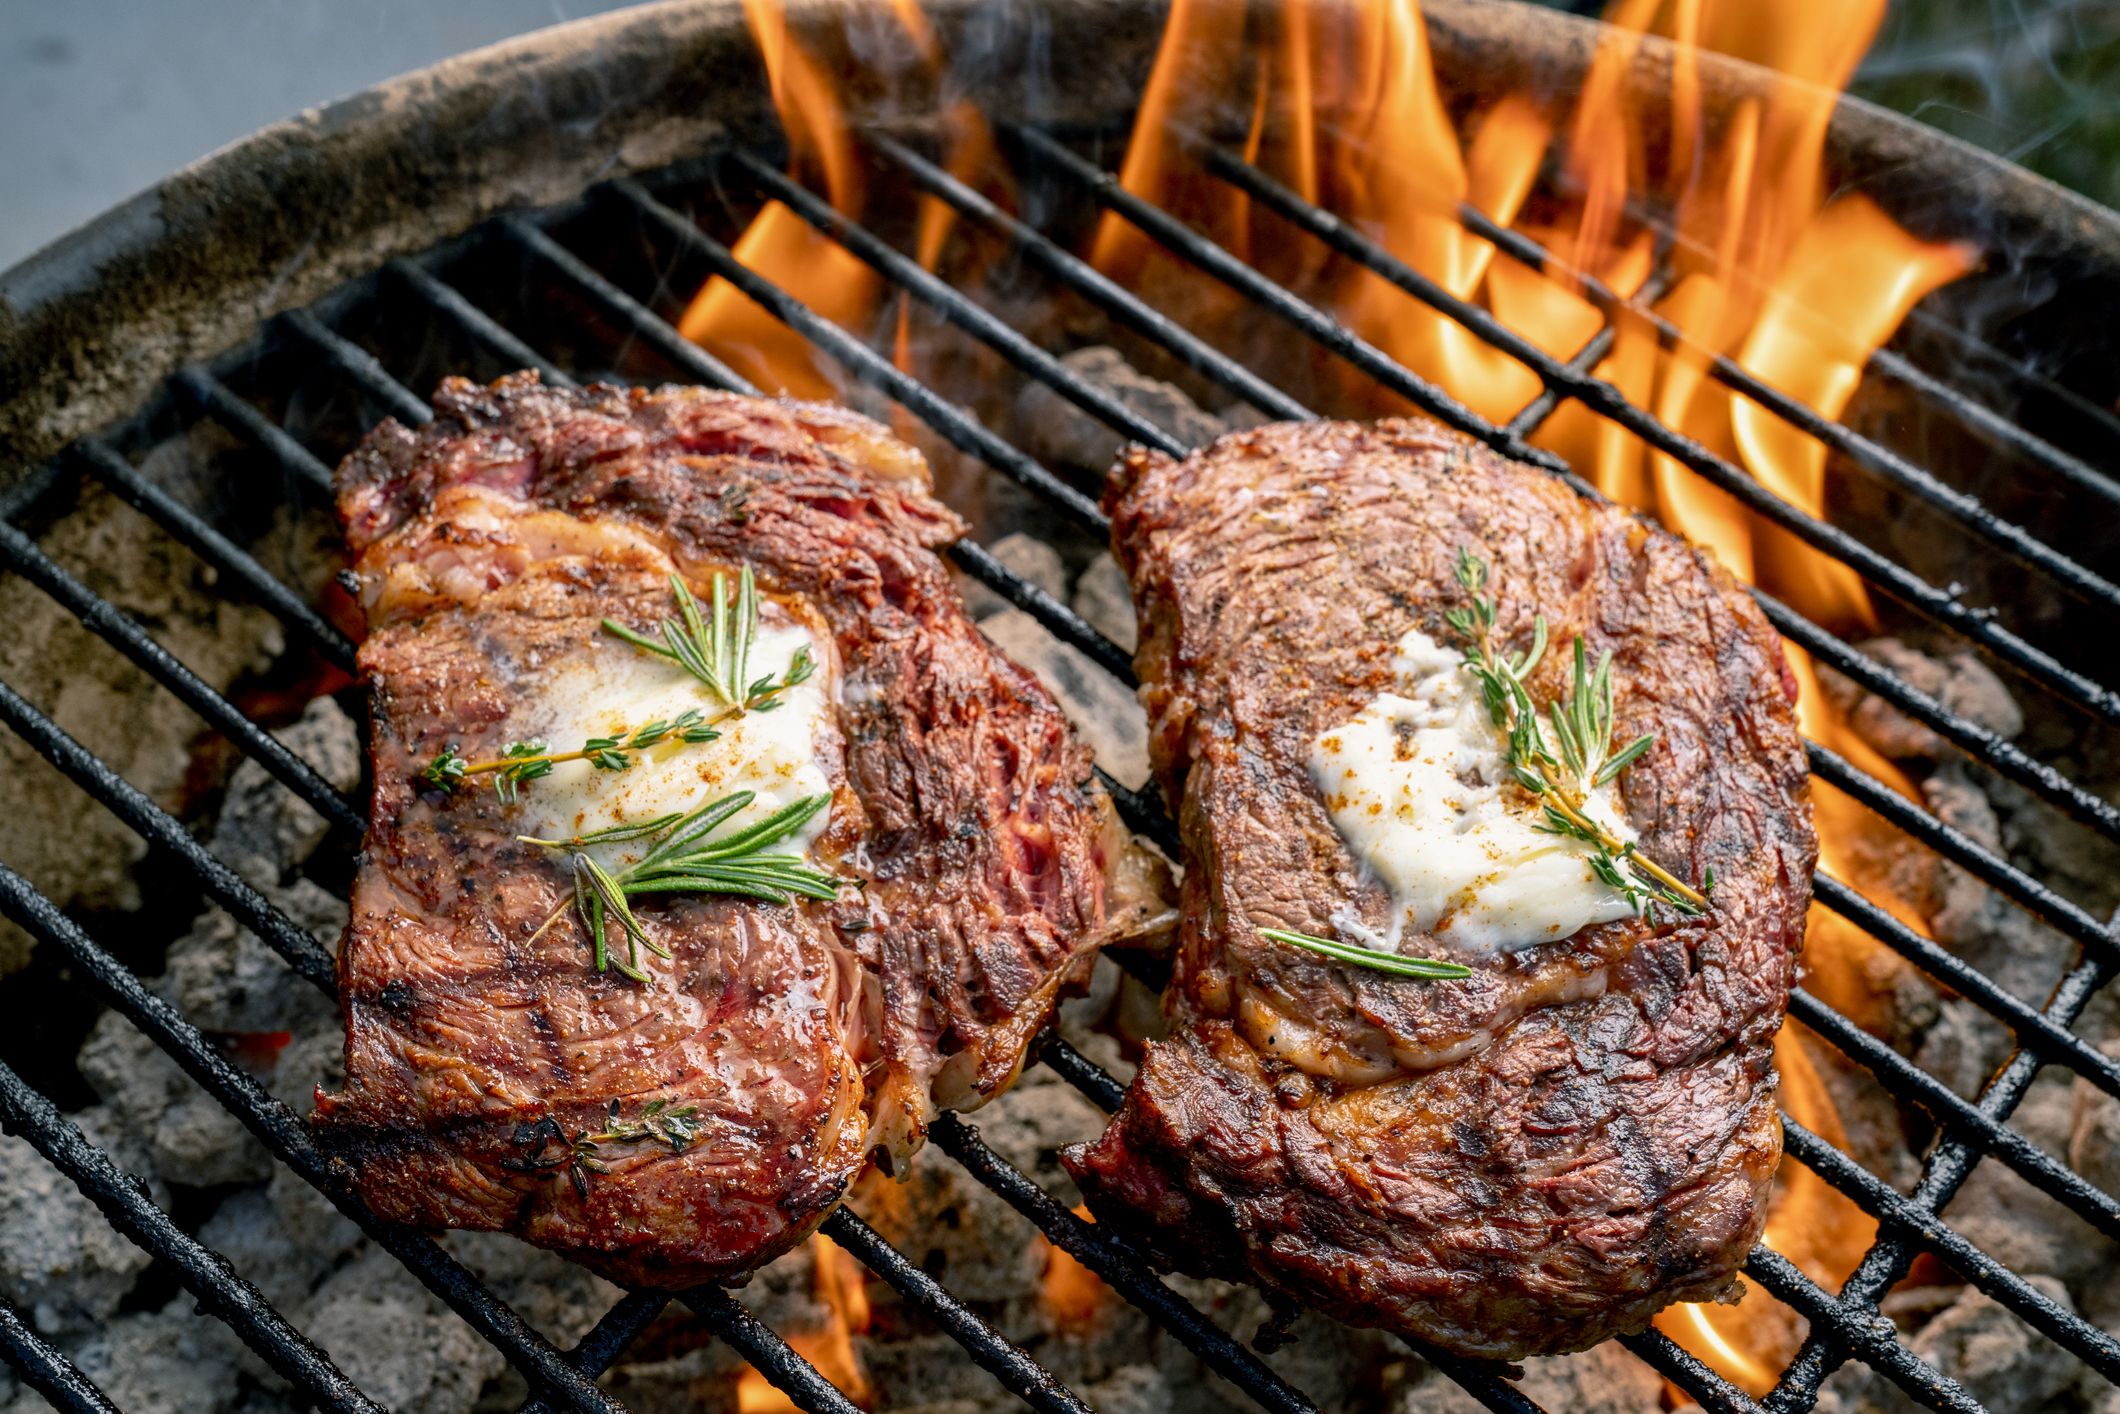 12 Best Steaks for Grilling - Best Cuts of Steak to Grill